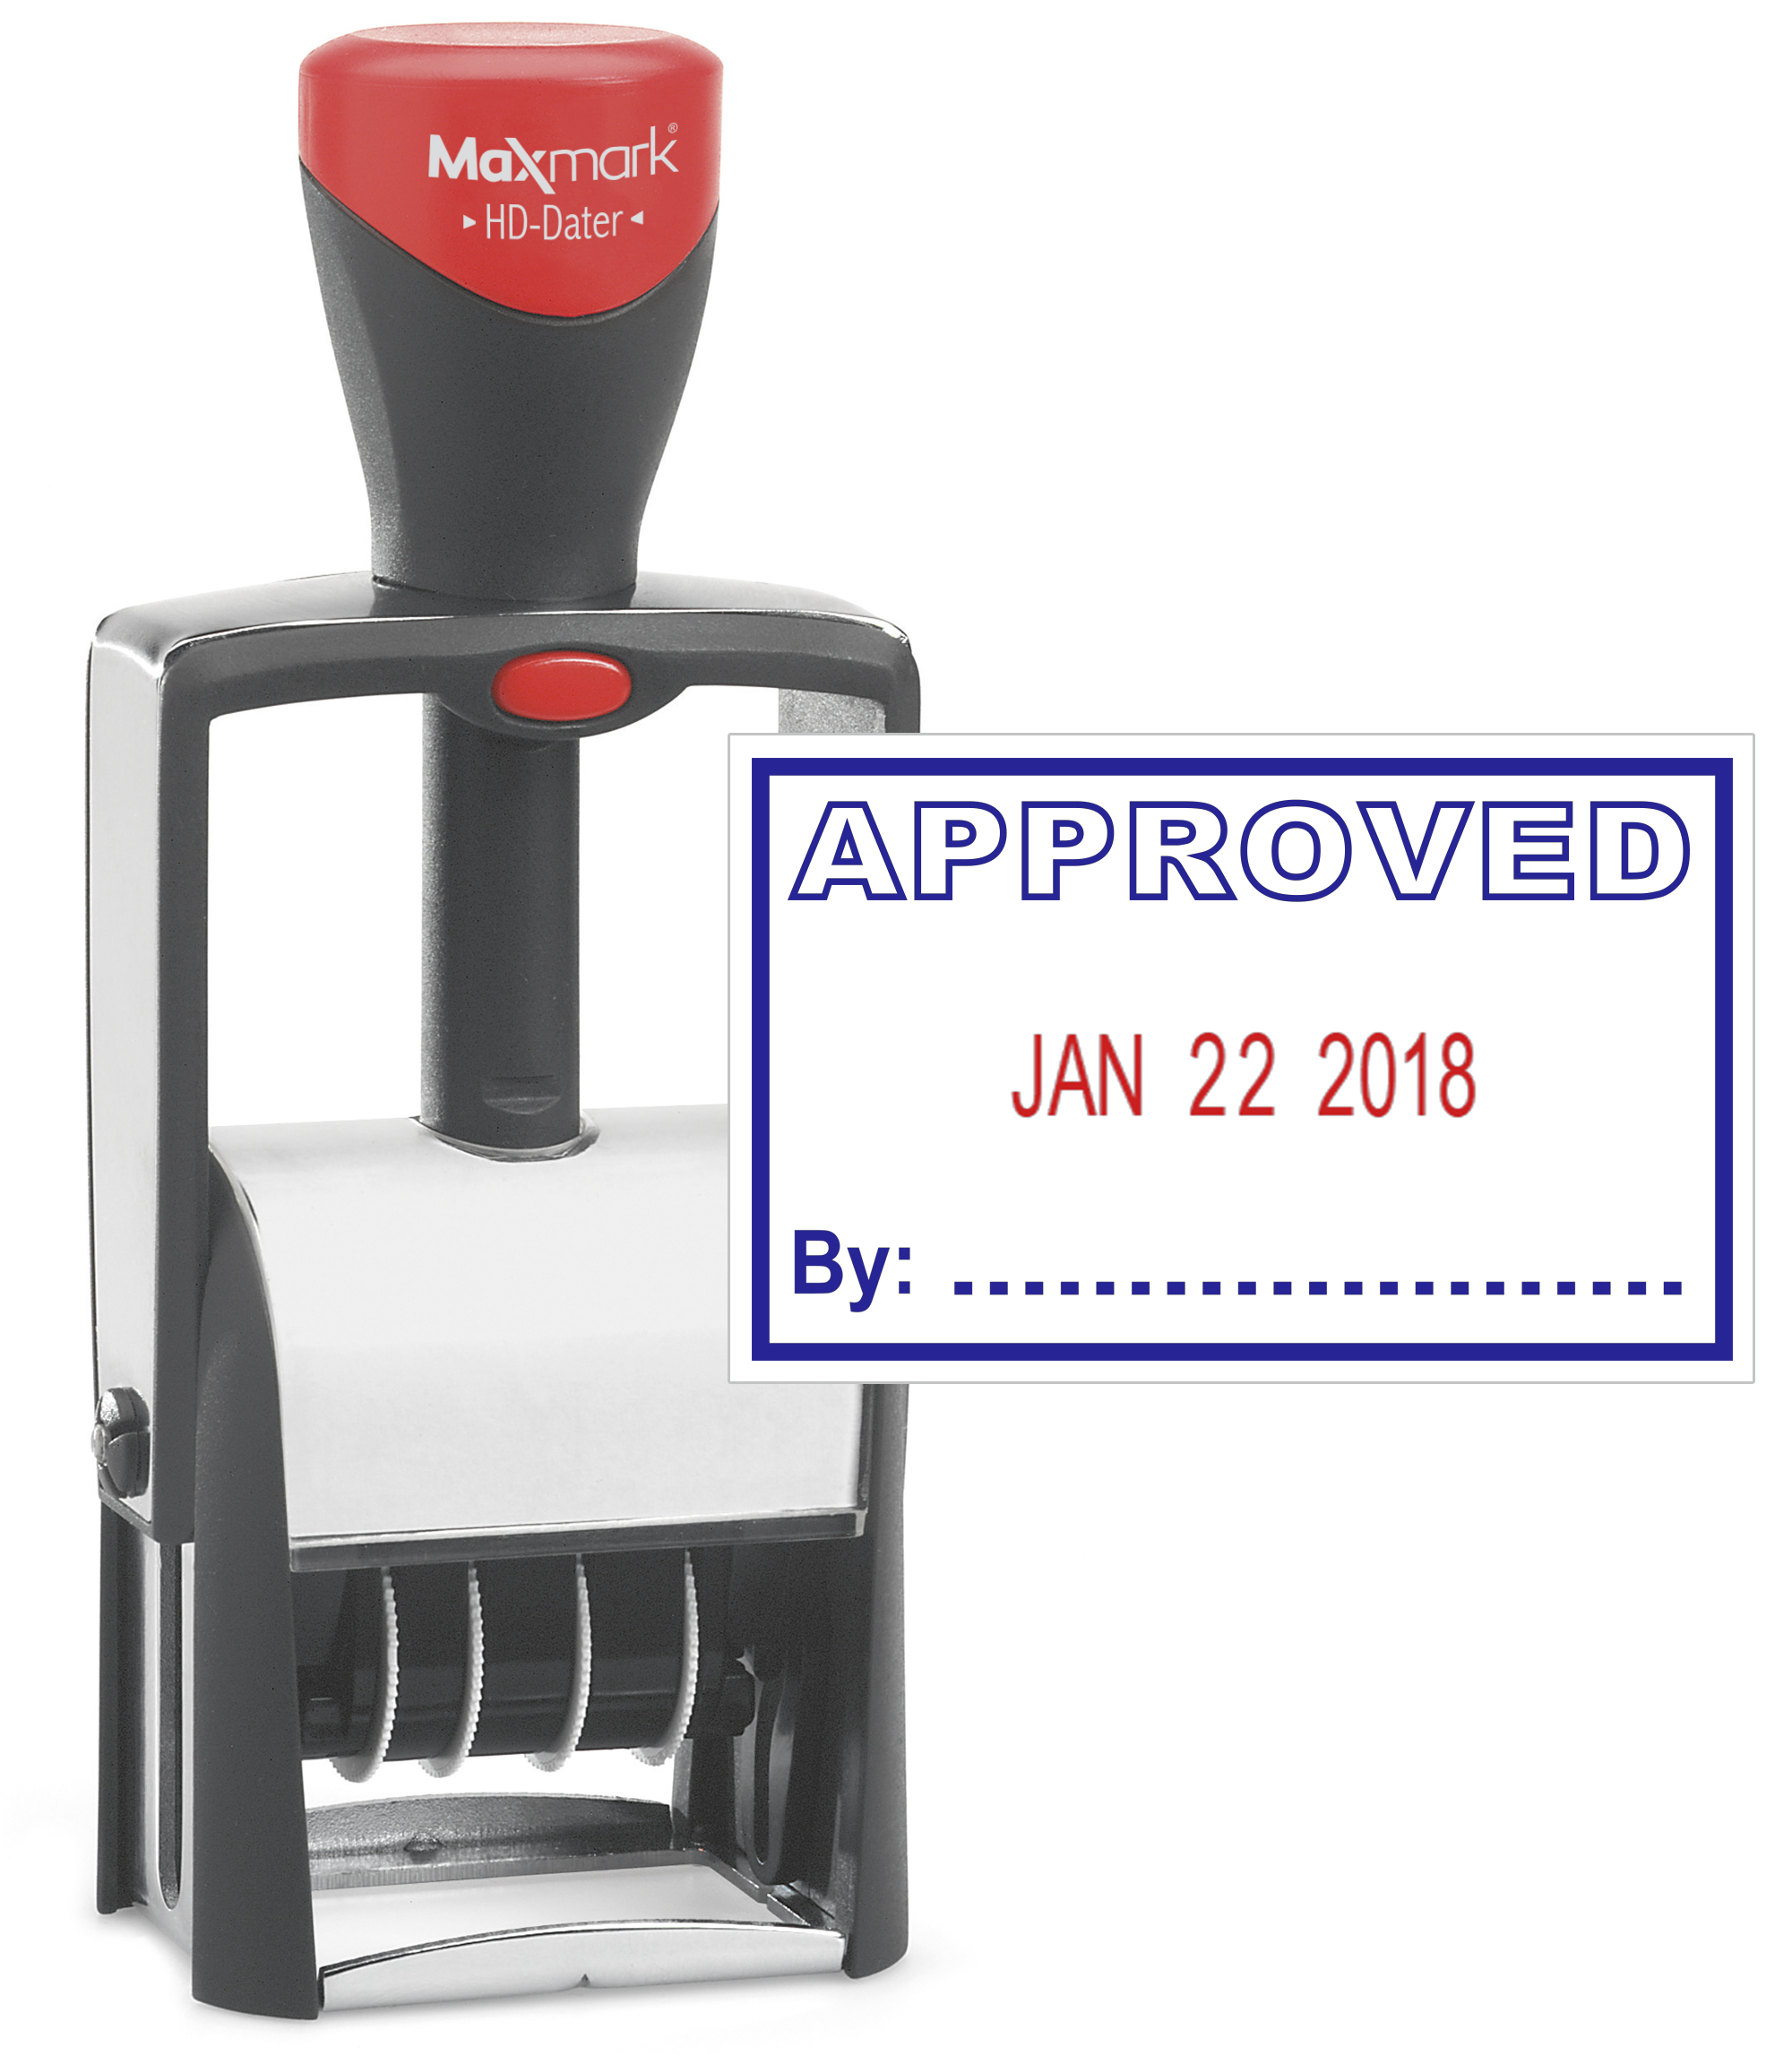 Heavy Duty Date Stamp with "APPROVED" Self Inking Stamp - 2 Color Blue/Red Ink